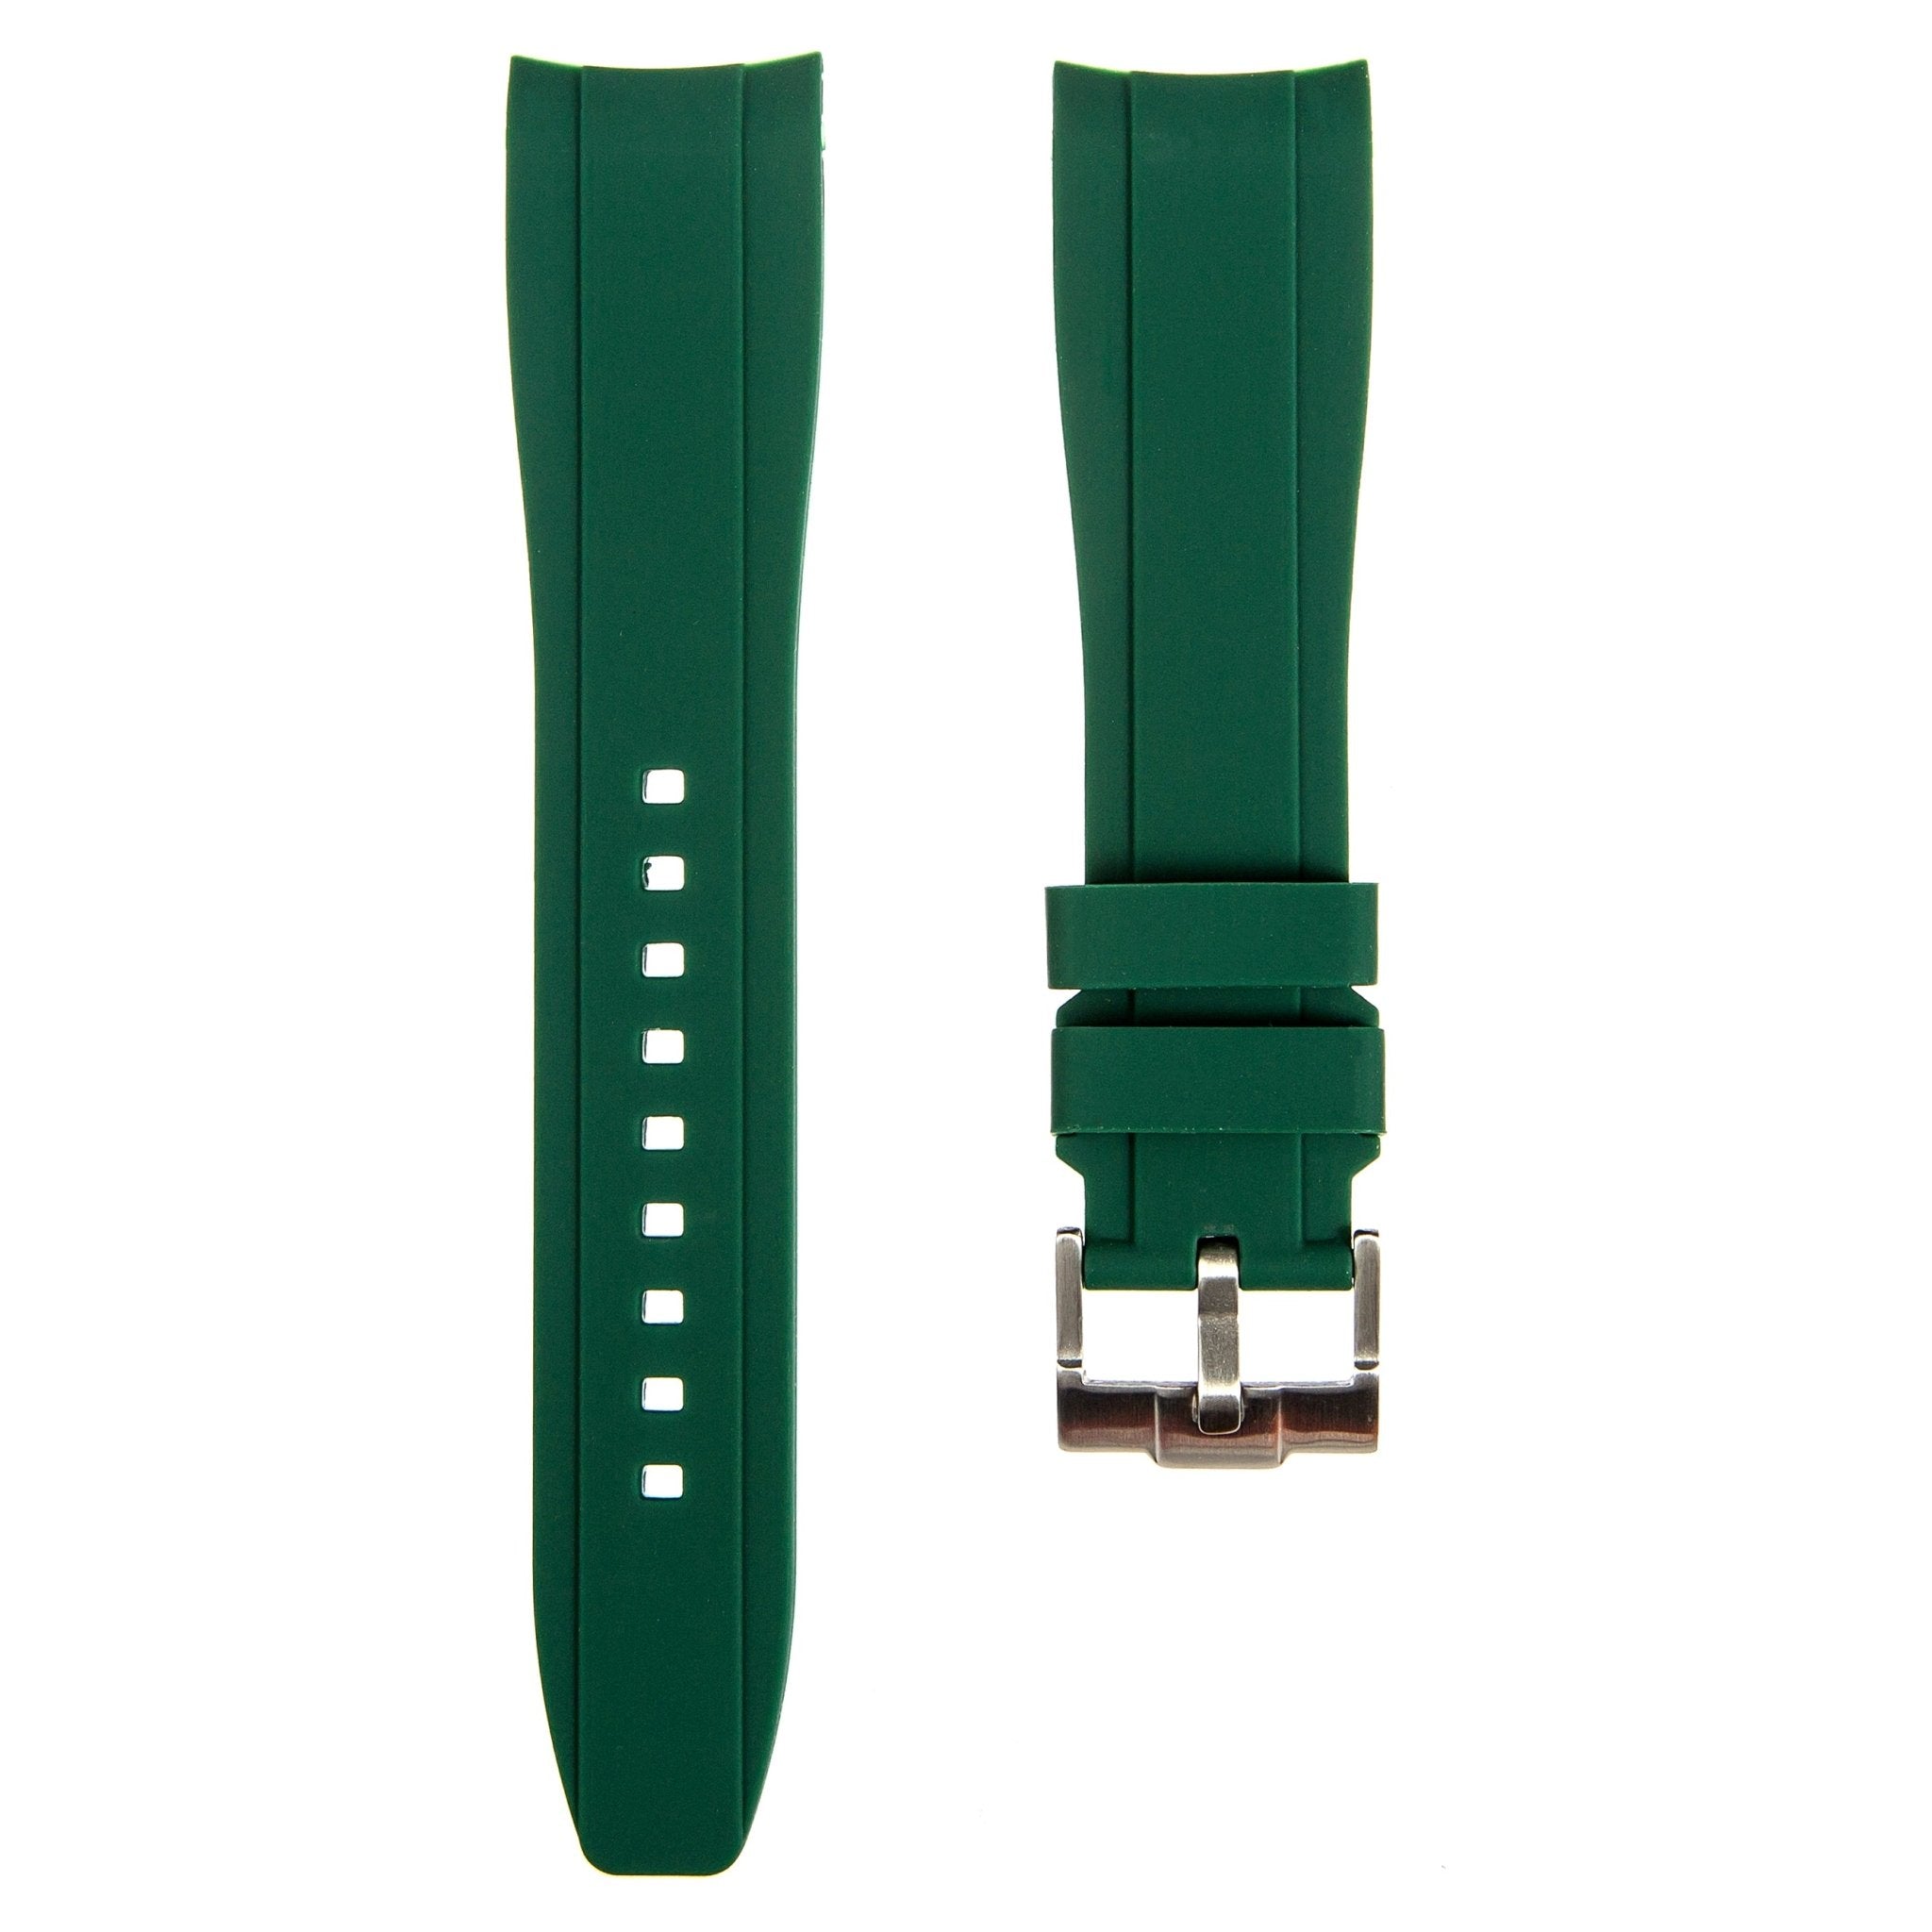 Curved End Soft Silicone Strap - Compatible with Blancpain x Swatch - Dark Green (2418) -StrapSeeker